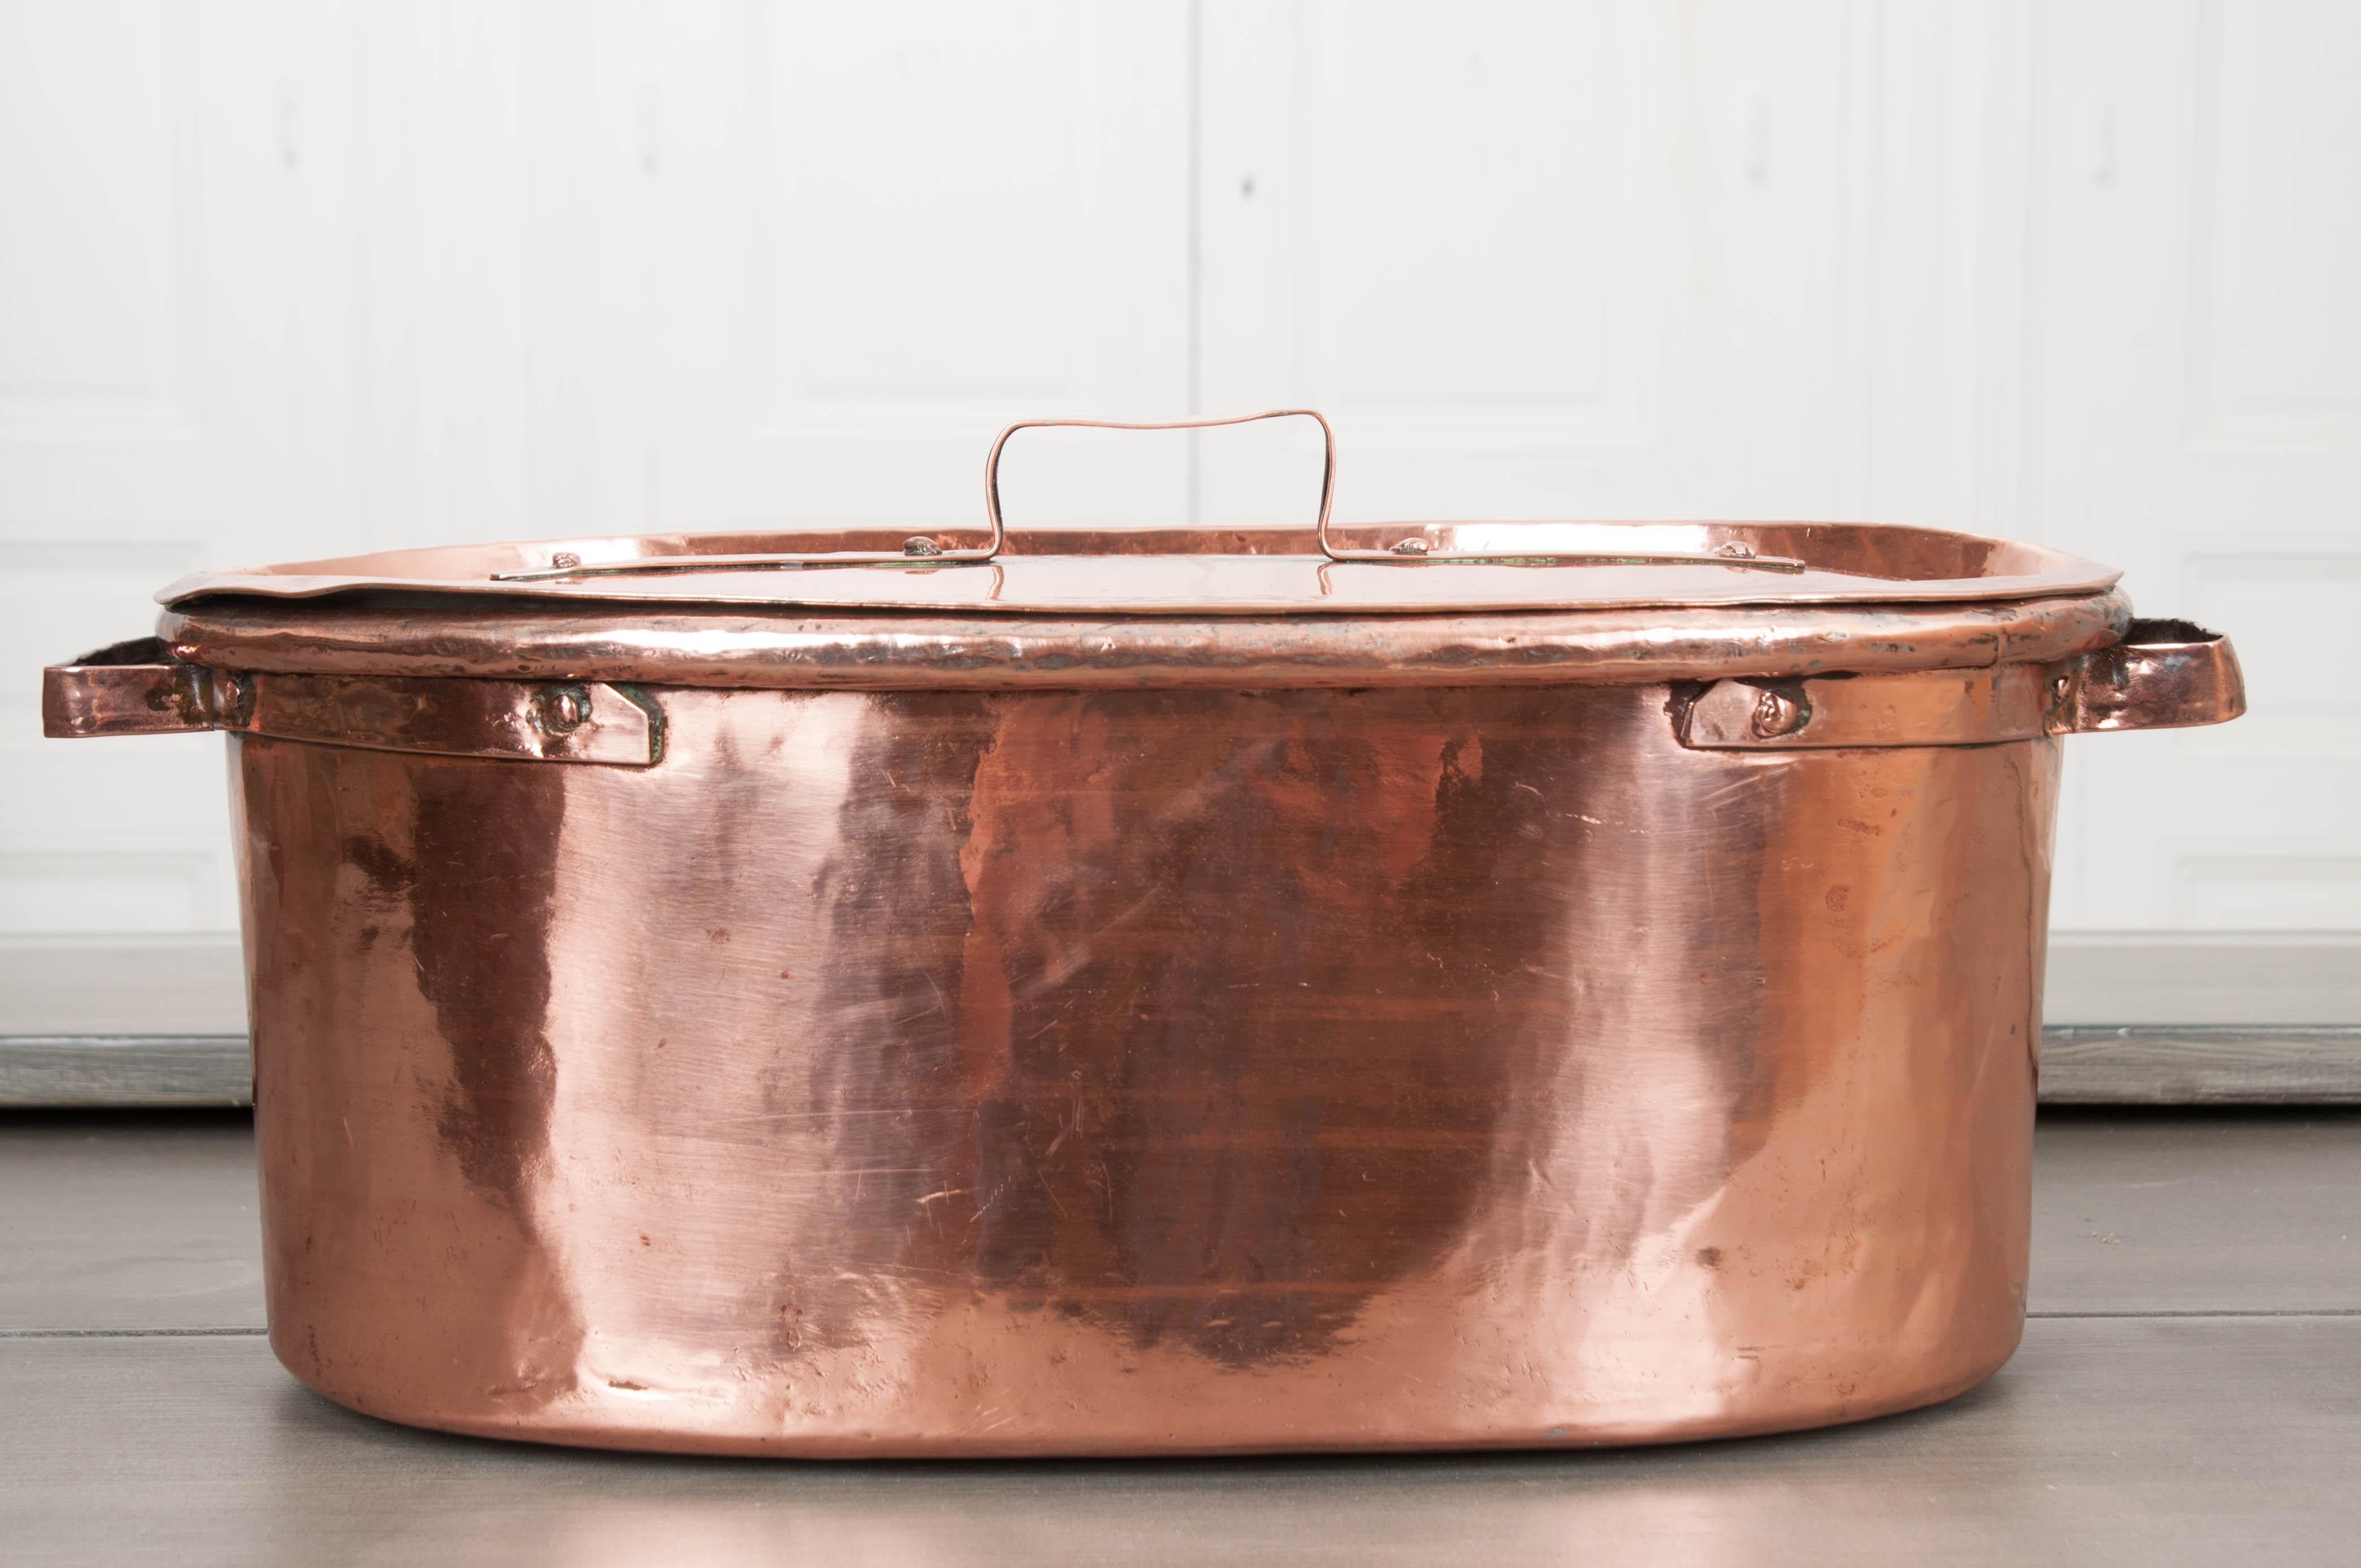 French Provincial French 19th Century Lidded Copper Kettle